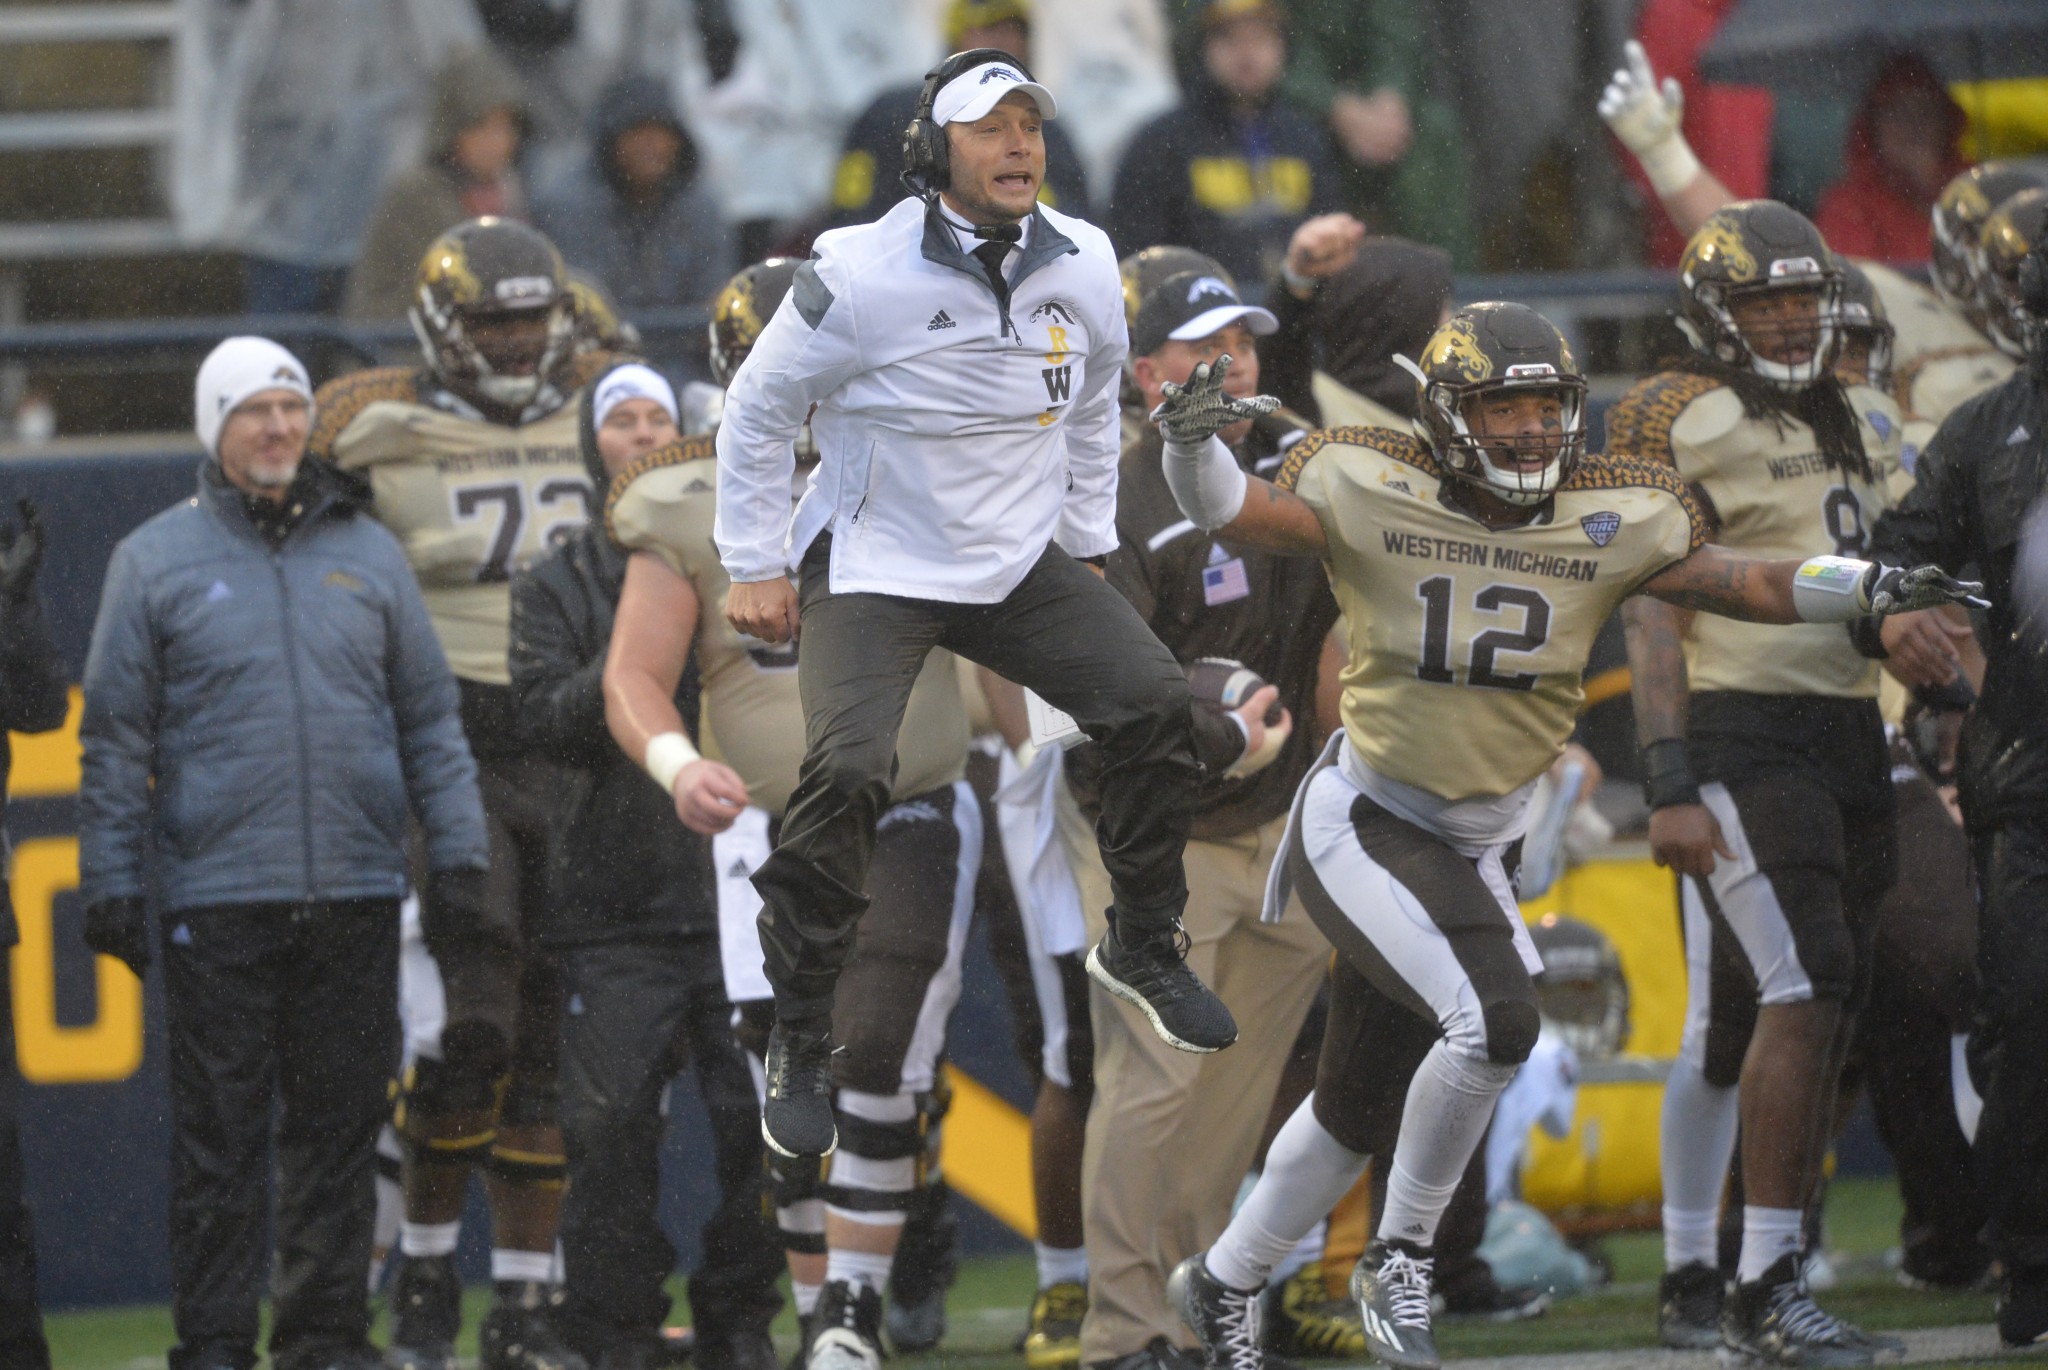 Western Michigan head coach P.J. Fleck is presumably excited his team was picked to win the MAC. (AP Photo/David Richard)